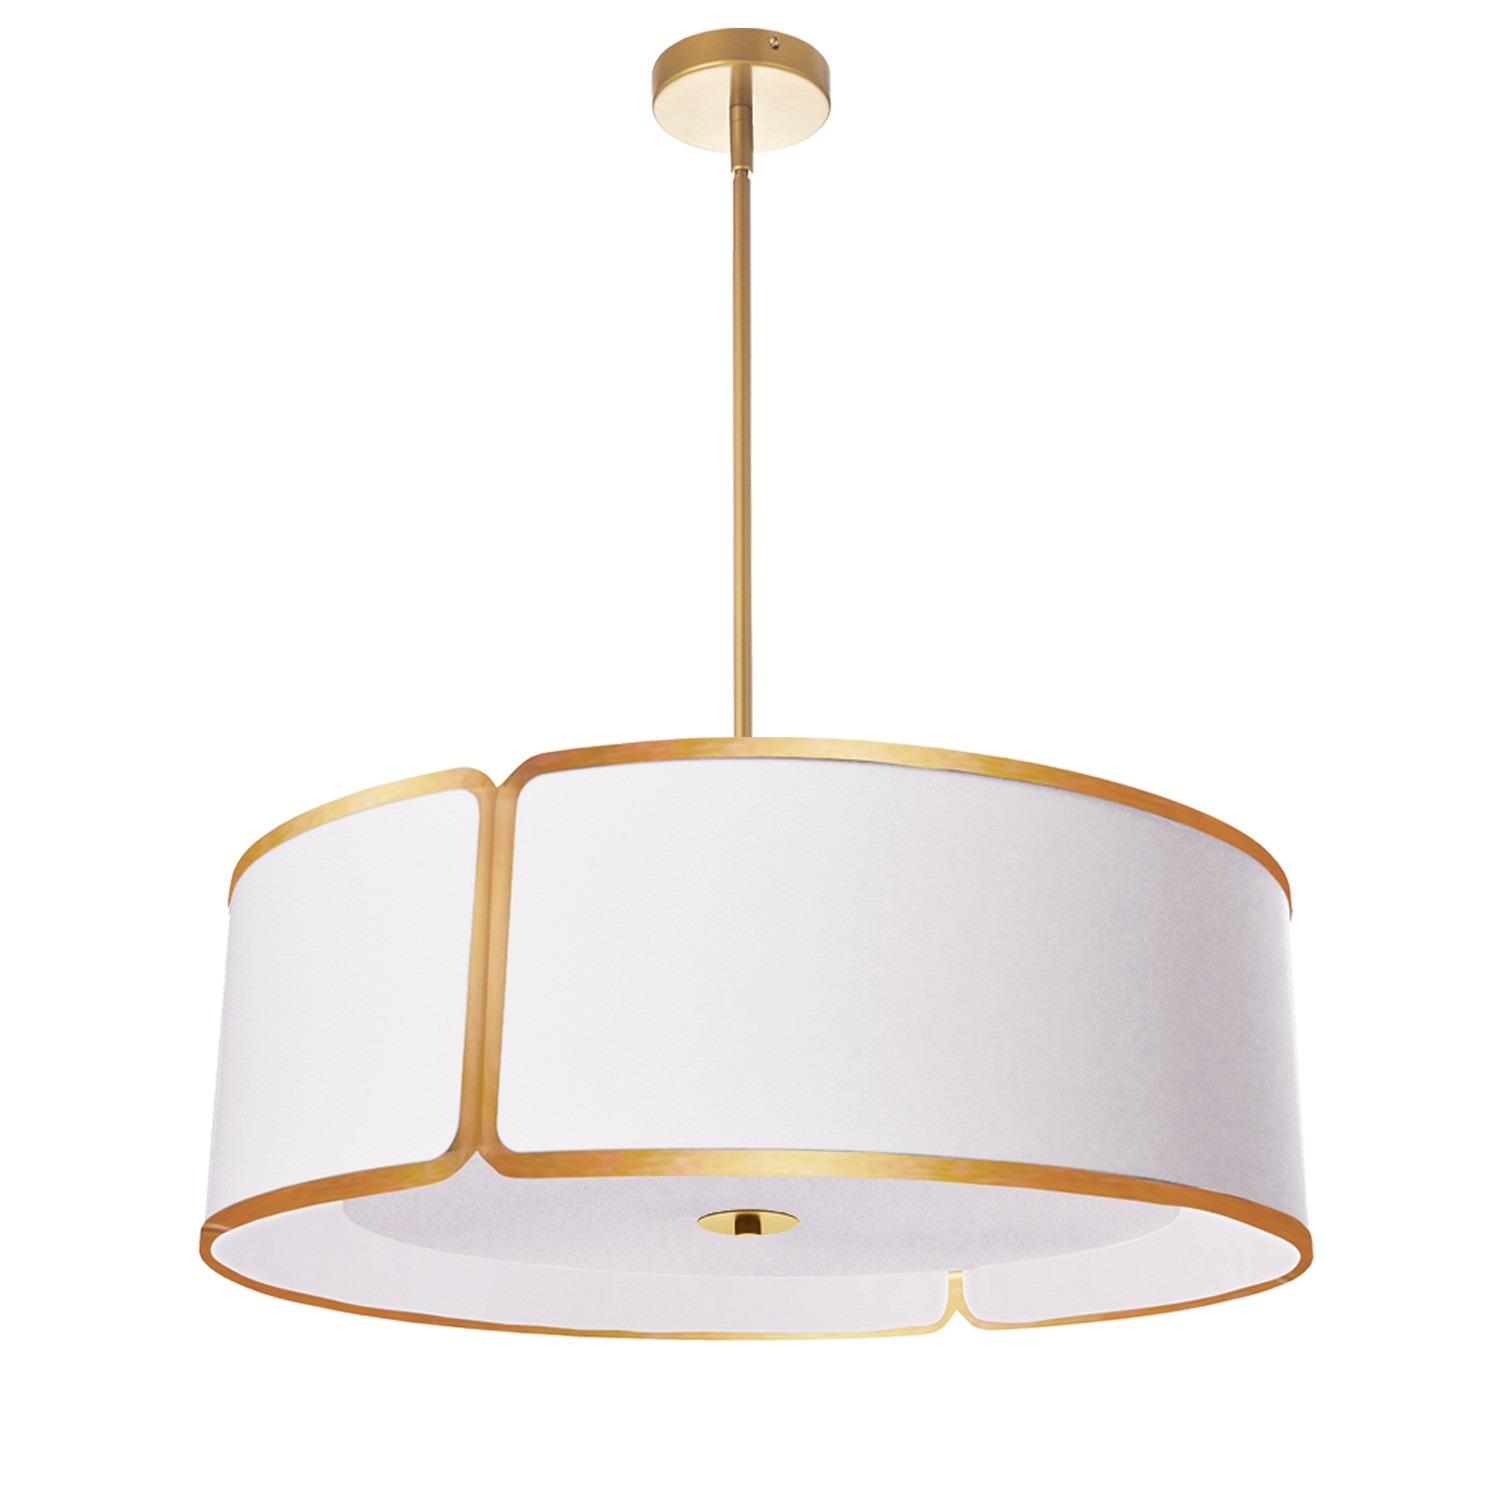 4 Light Gold Notched Drum Pendant, White Shade and Diffuser